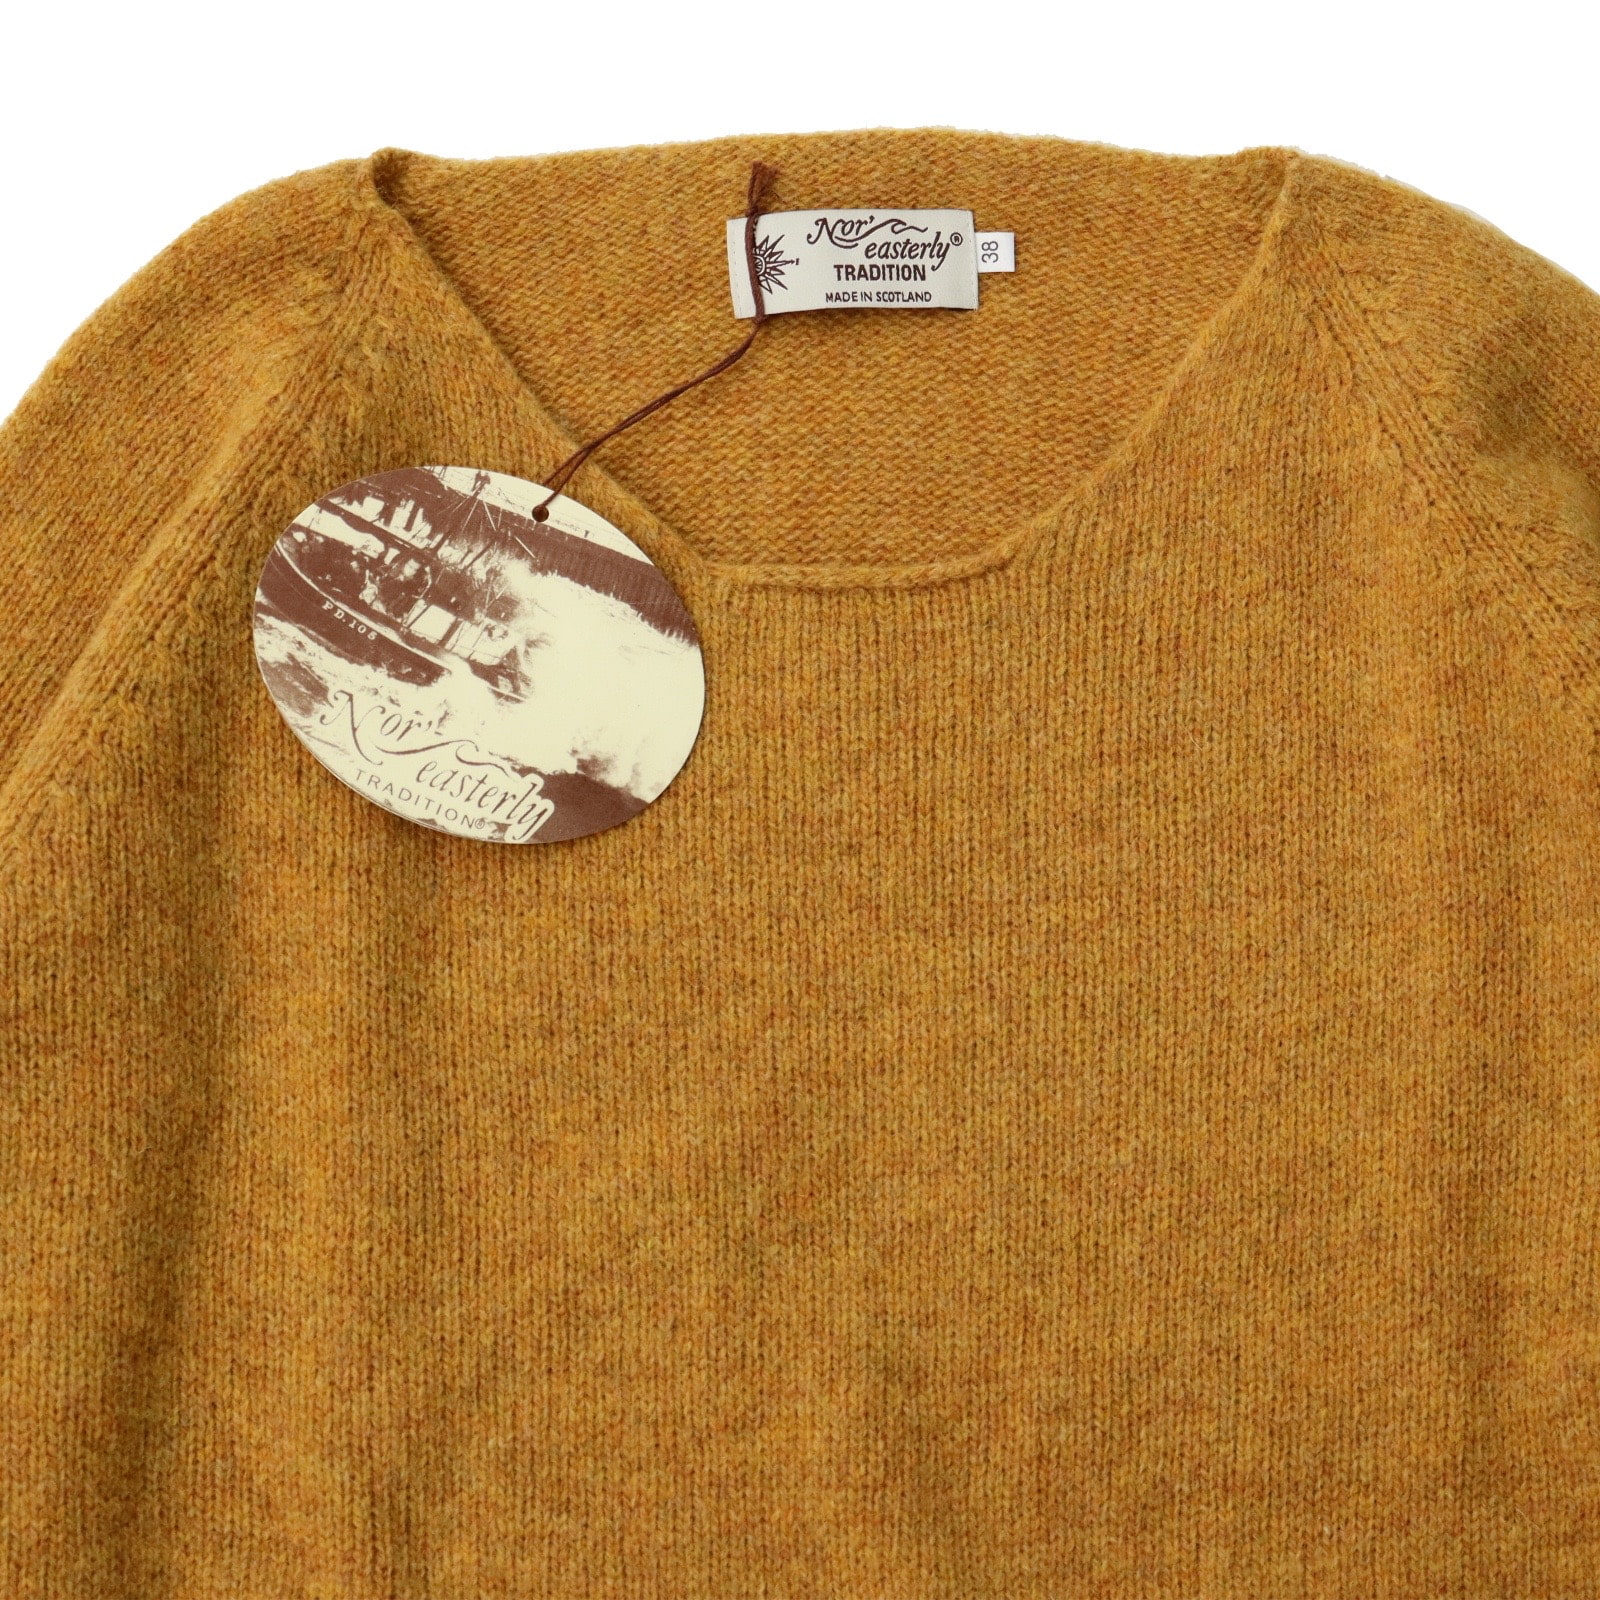 Nor'easterly TRADITIONノアイースターリー】L/S WIDE NECK ニット｜13 